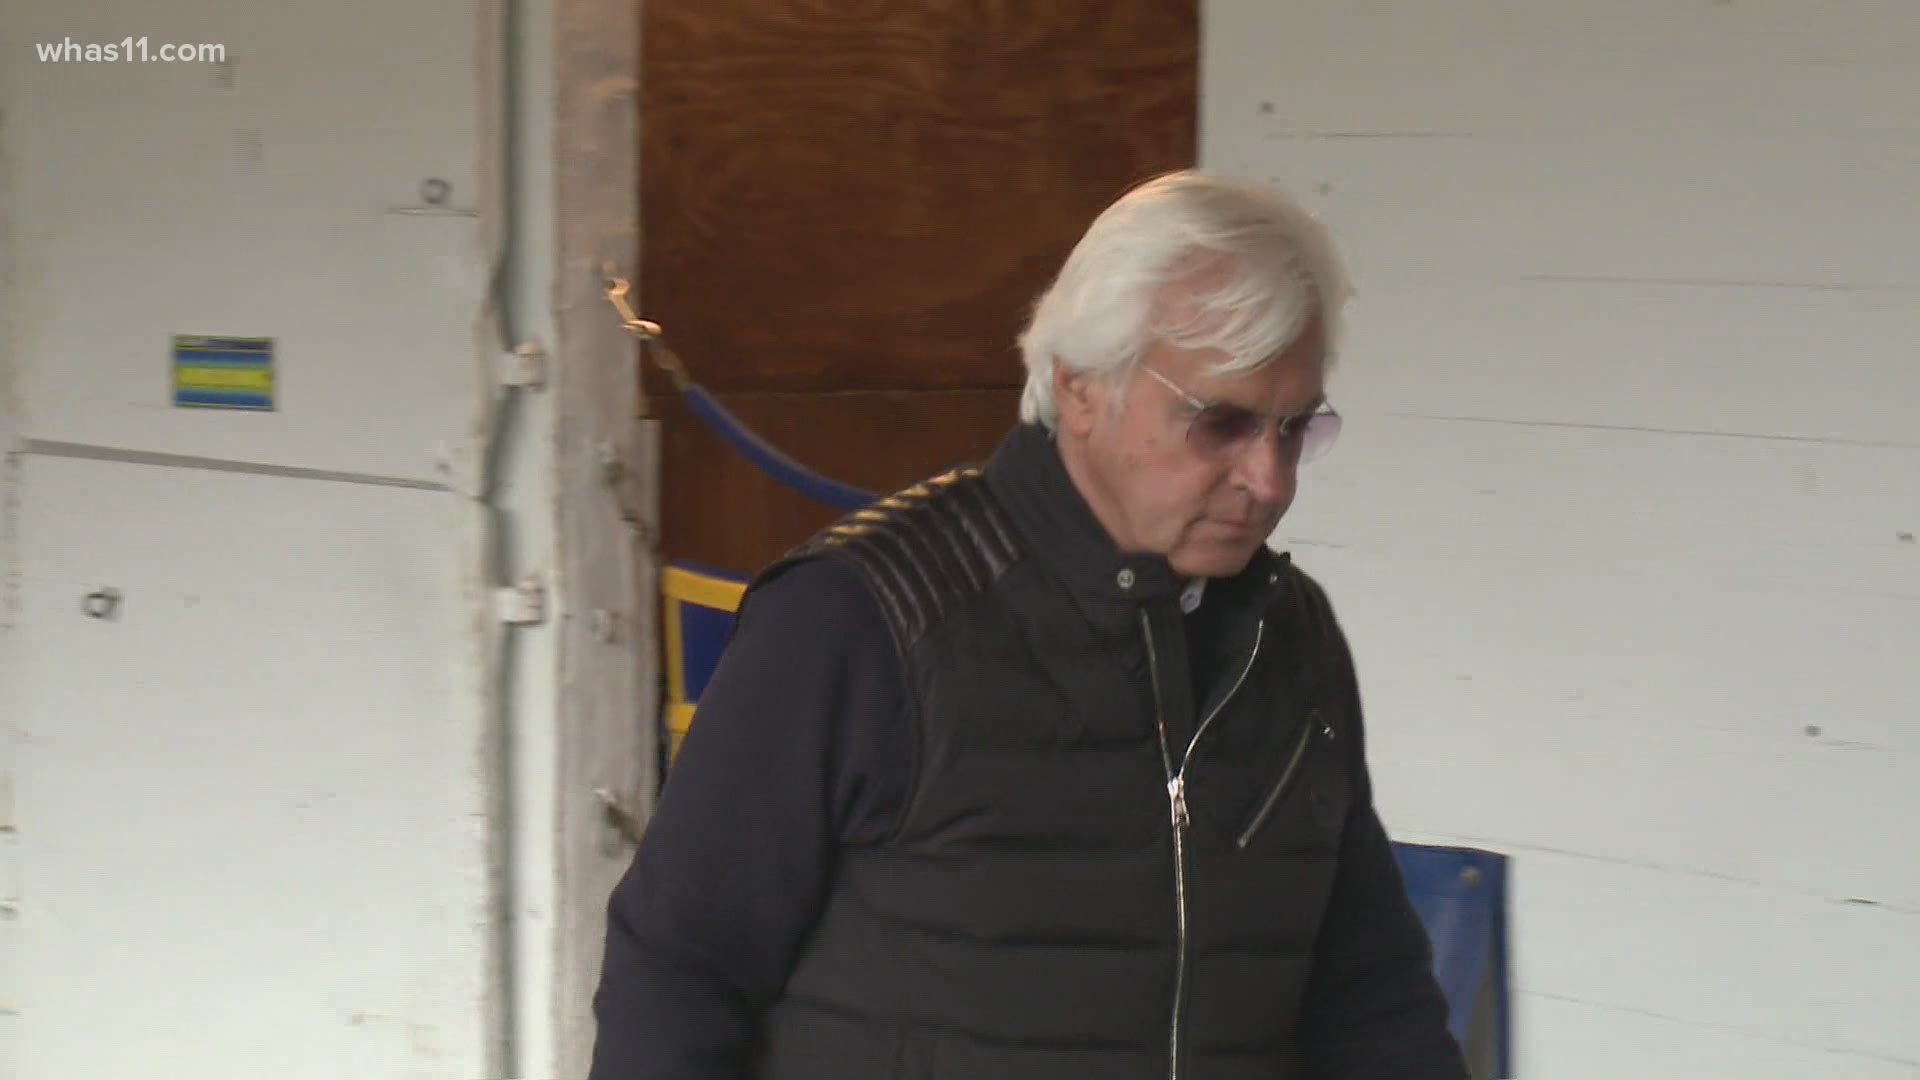 The New York Racing Association has temporarily suspended Bob Baffert from entering horses in races at tracks like Belmont, the last leg of the Triple Crown.